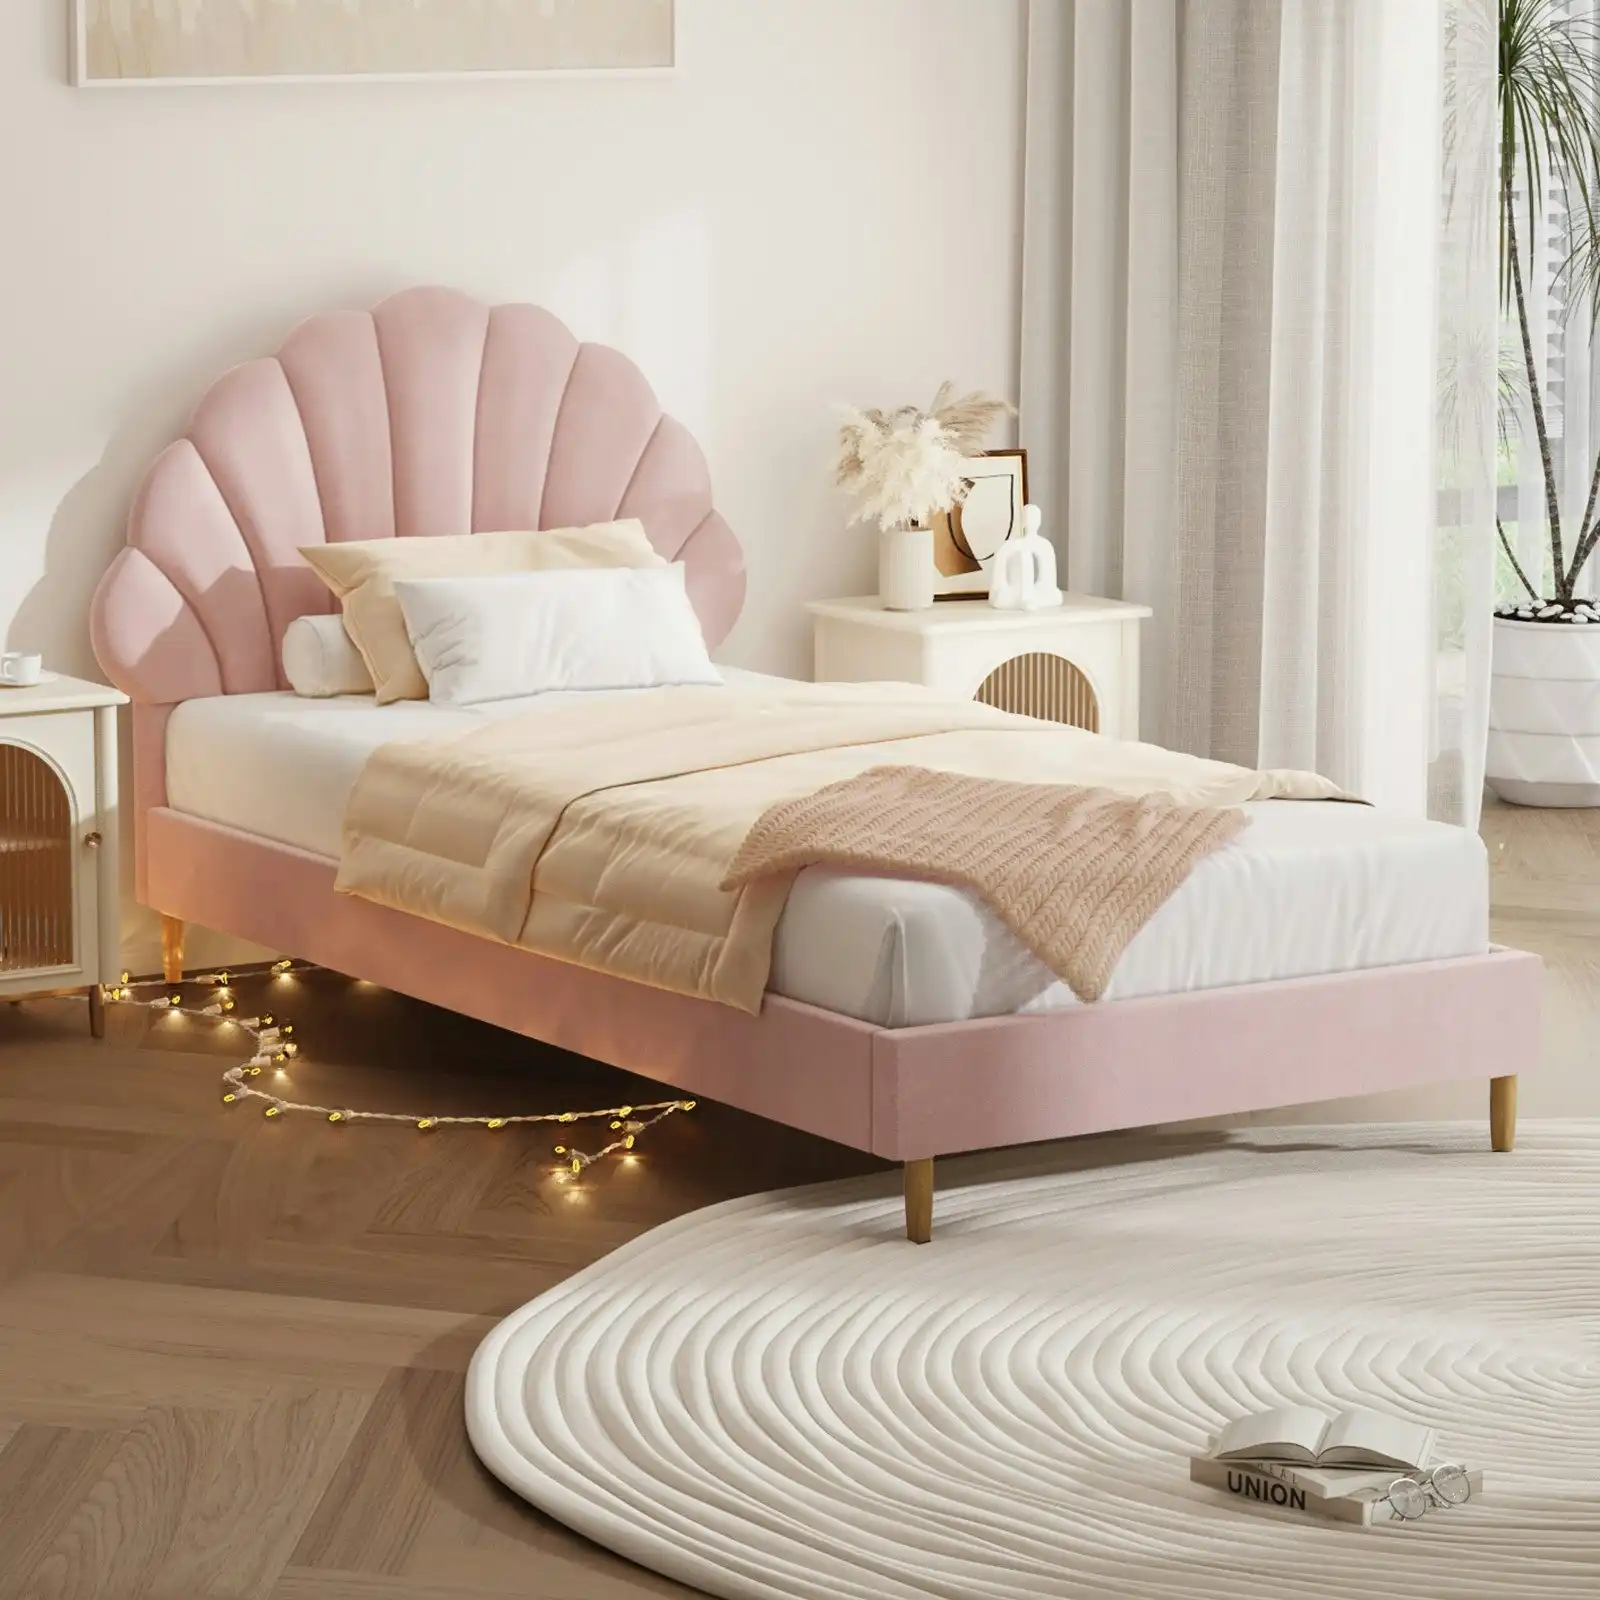 Oikiture Bed Frame Single Size Scallop-Shape Bedhead Pink Velvet